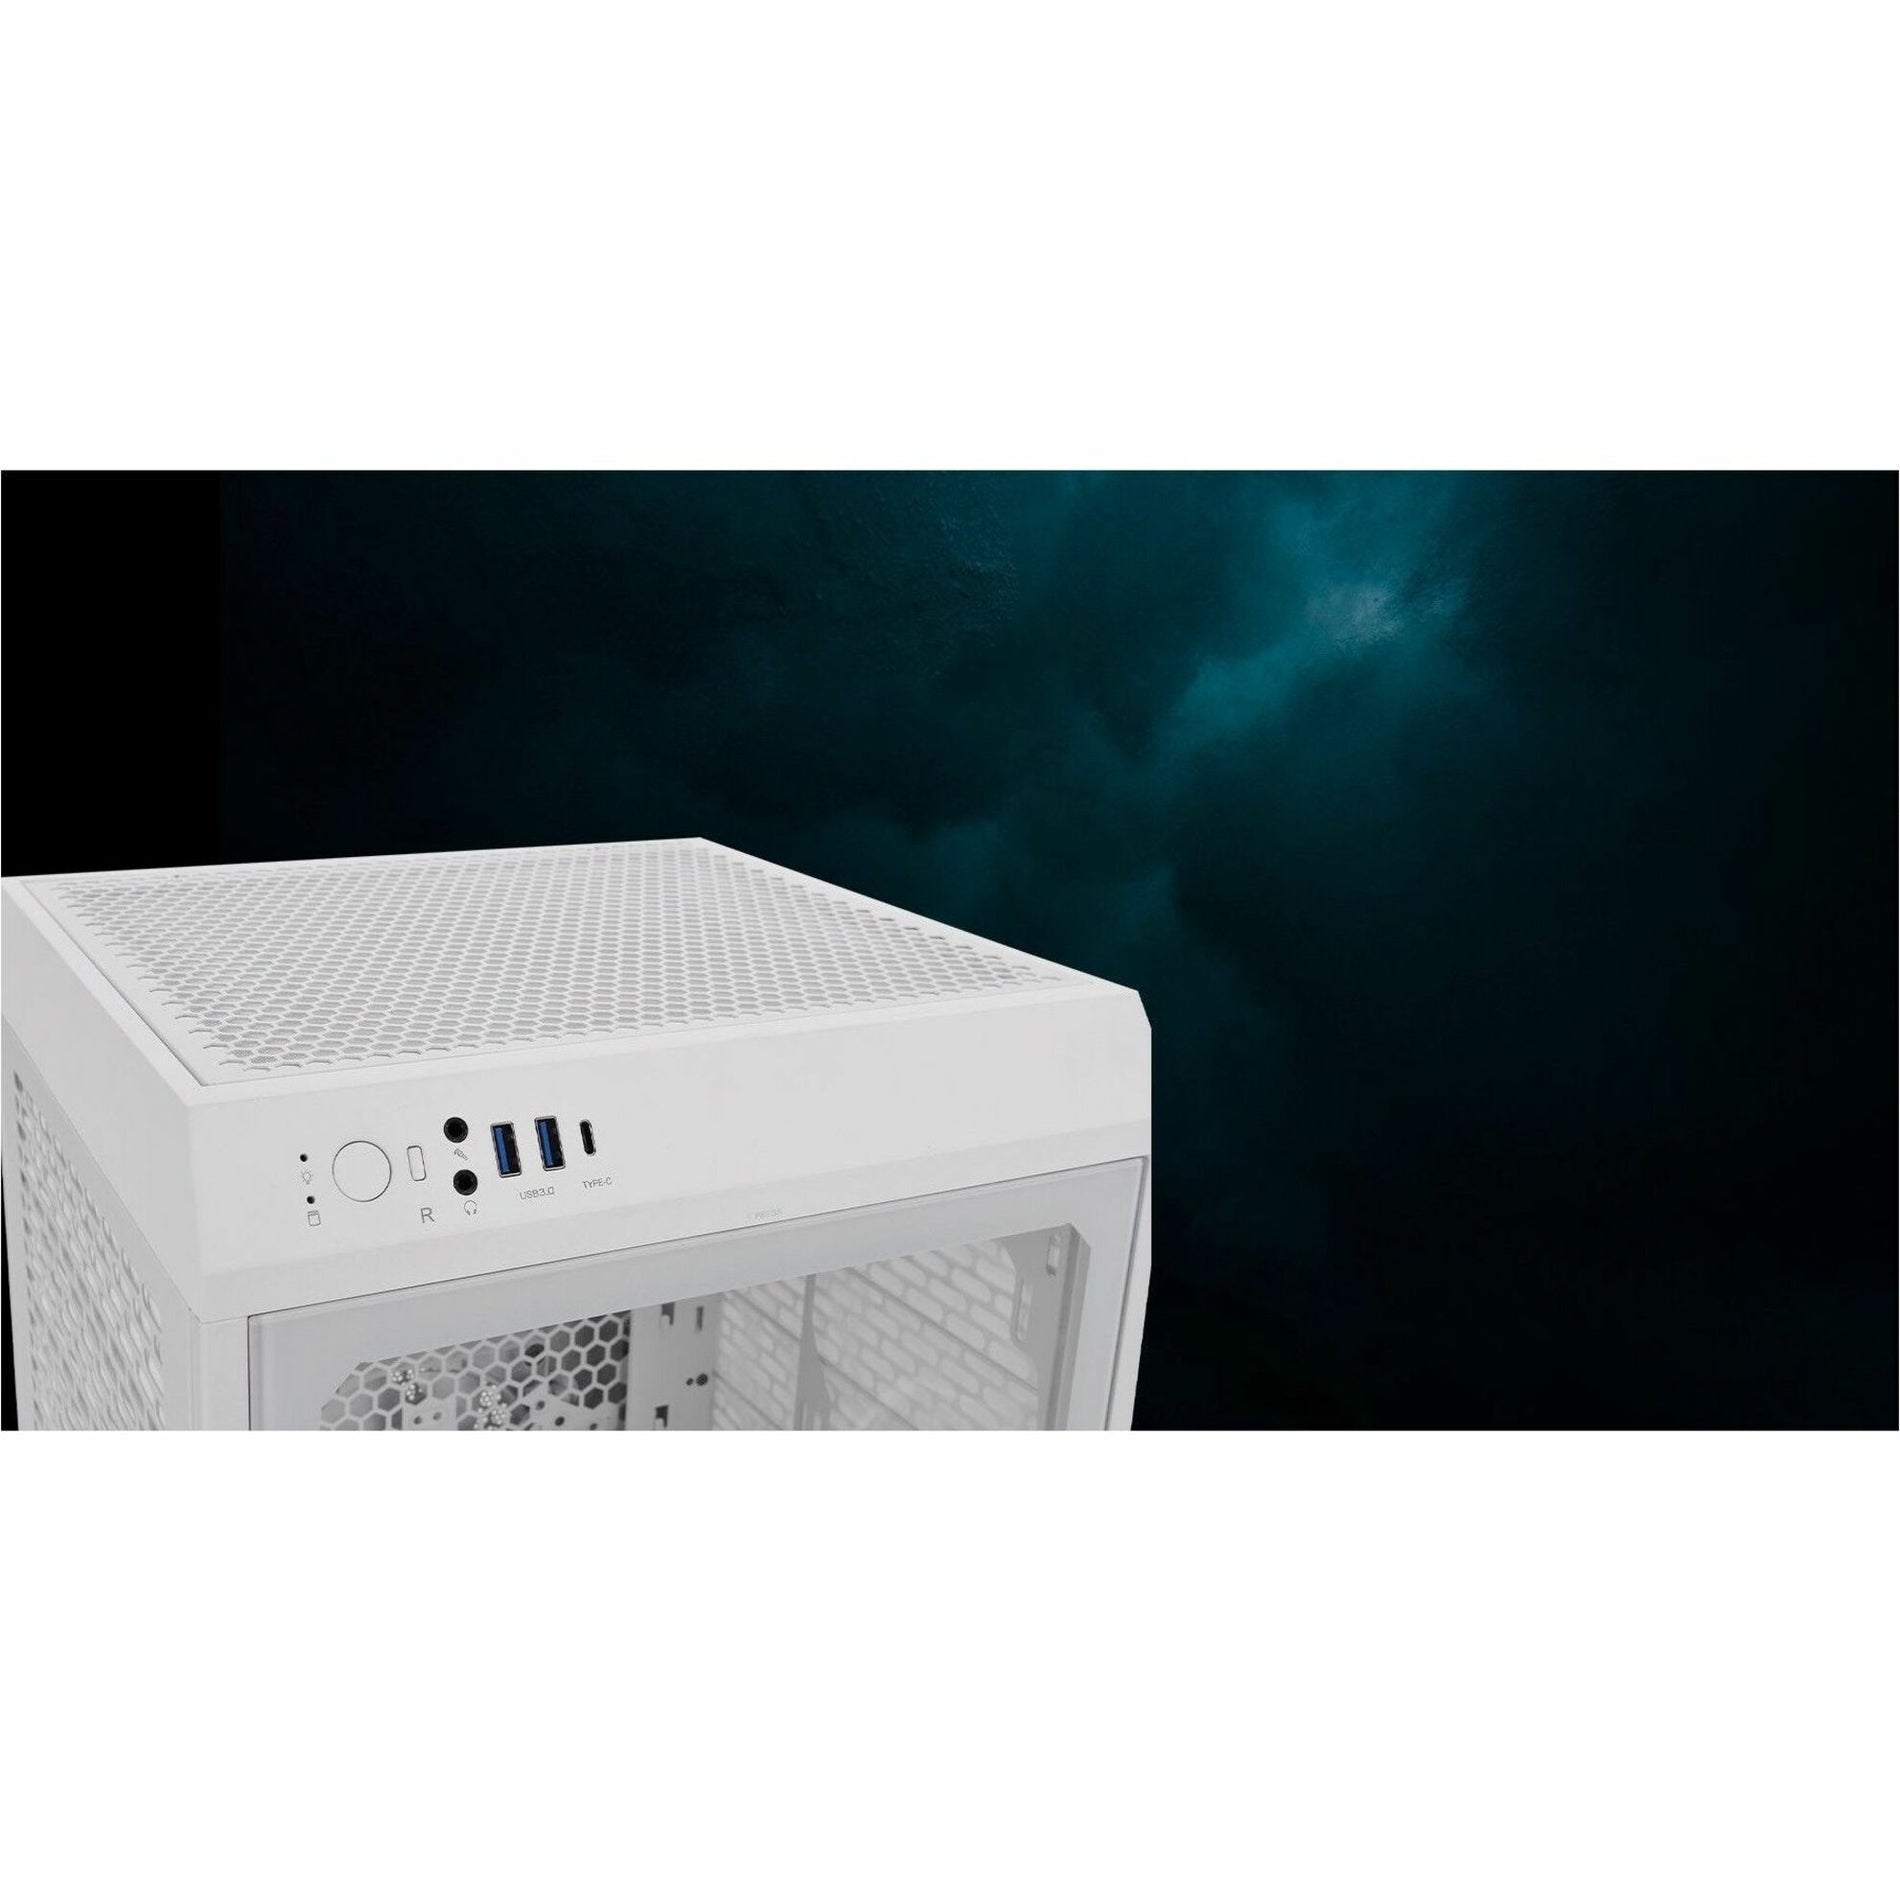 Thermaltake CA-1X9-00S6WN-00 The Tower 200 Snow Mini Chassis, Gaming Computer Case, White, Tempered Glass, SPCC